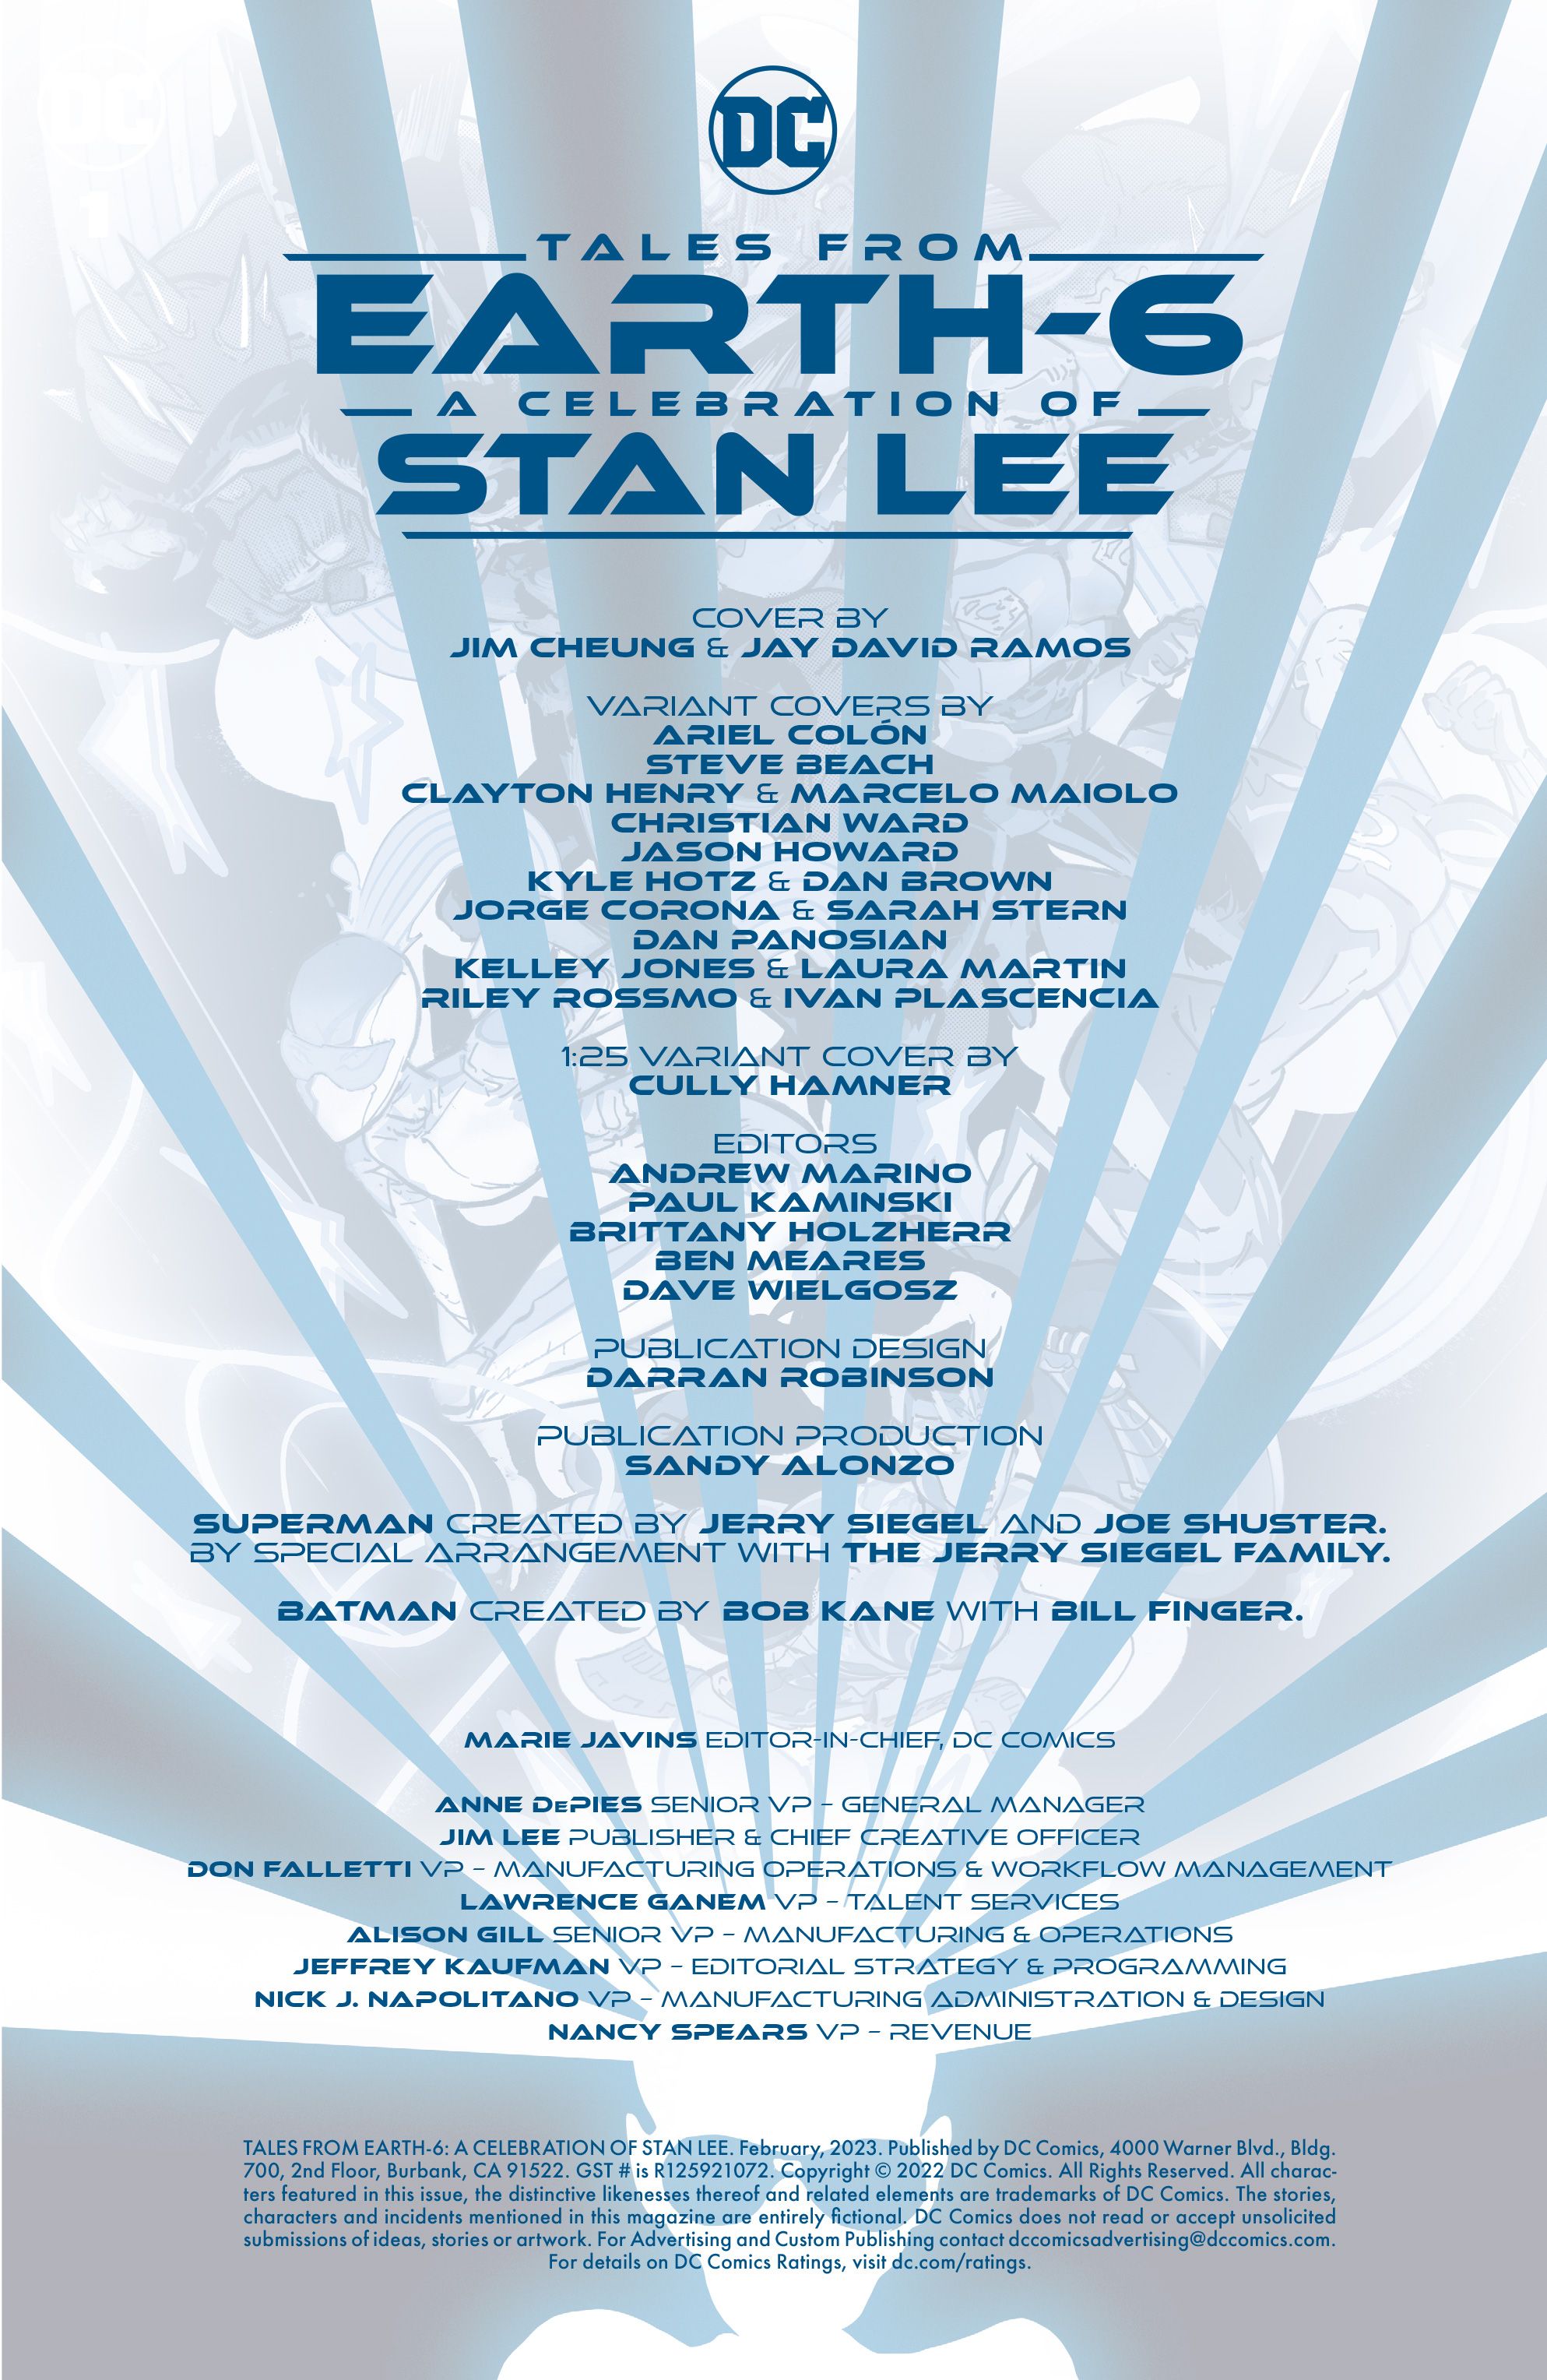 Tales-from-Earth-6-A-Celebration-of-Stan-Lee-1-13